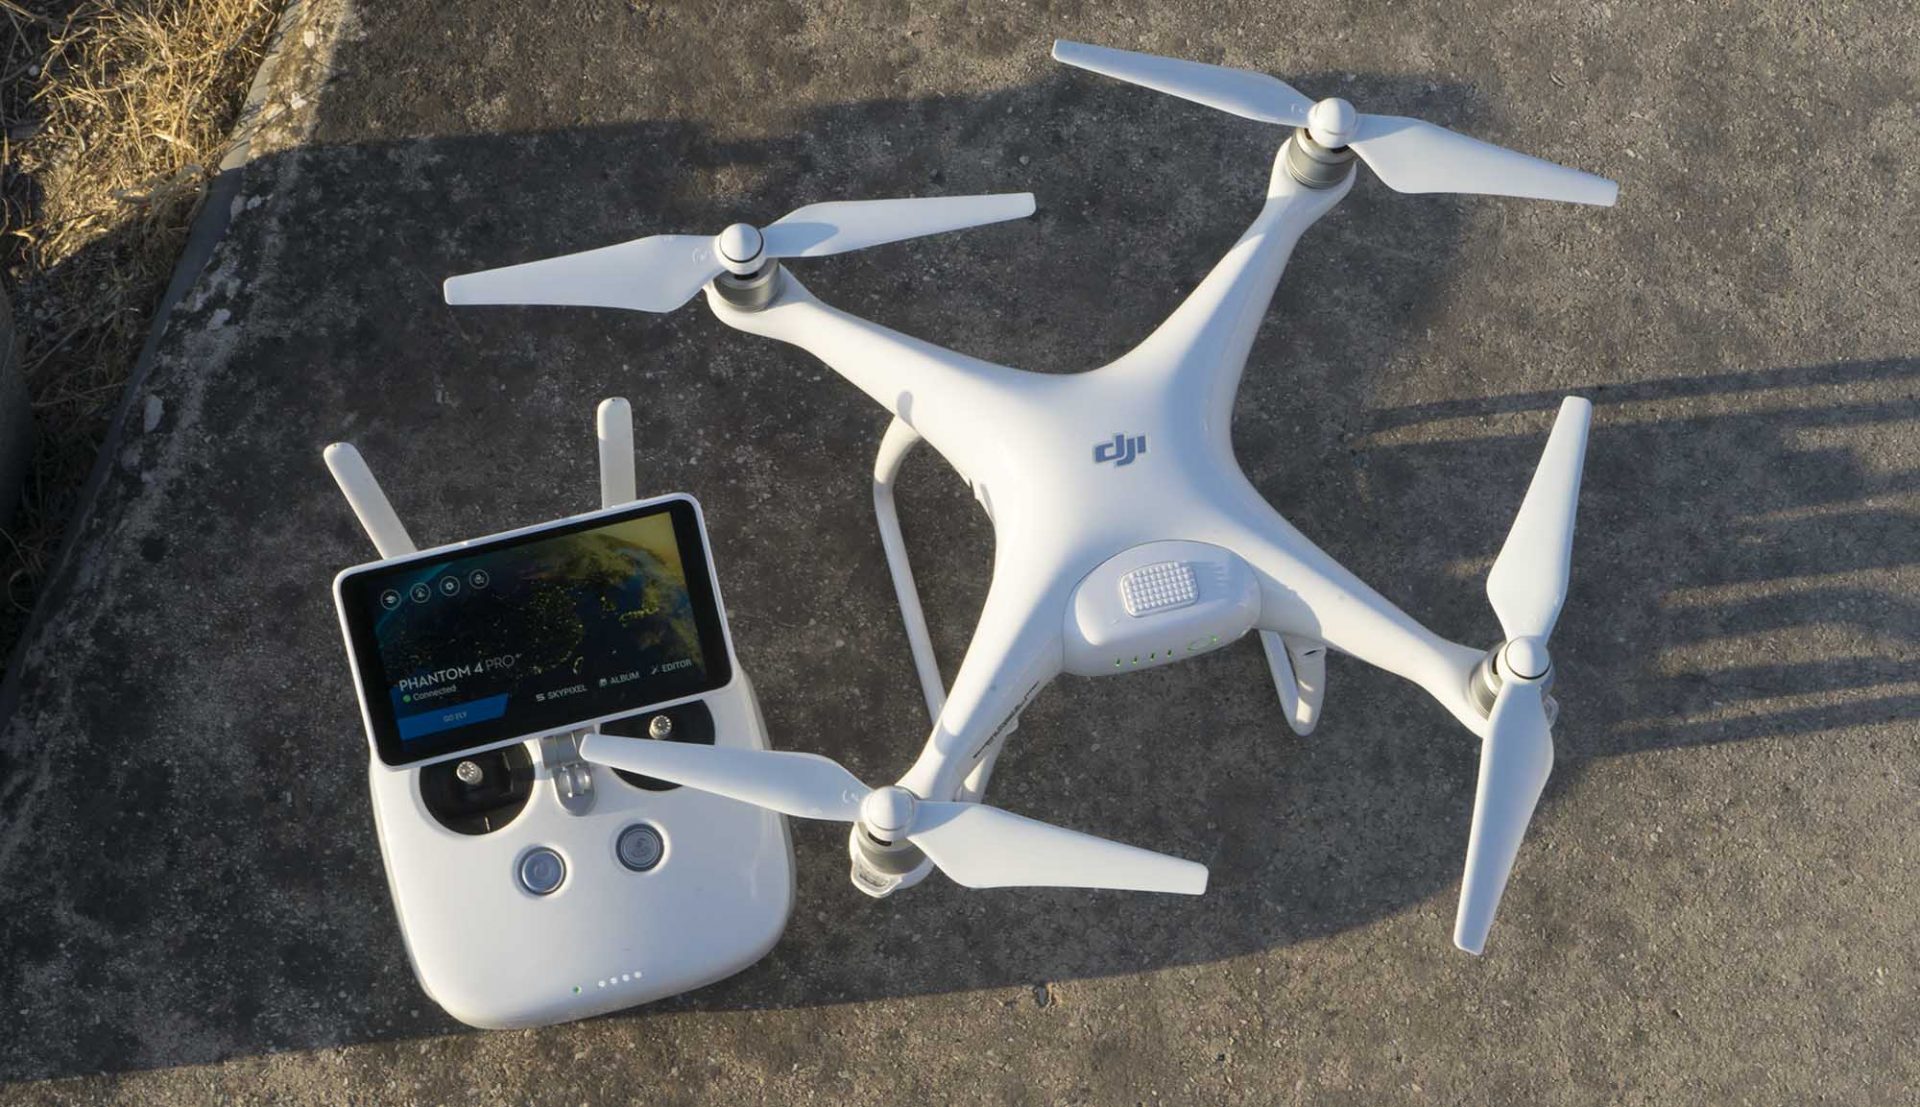 The Phantom 4 was retired in April 2017 in favour of the Phantom 4 Pro or.....